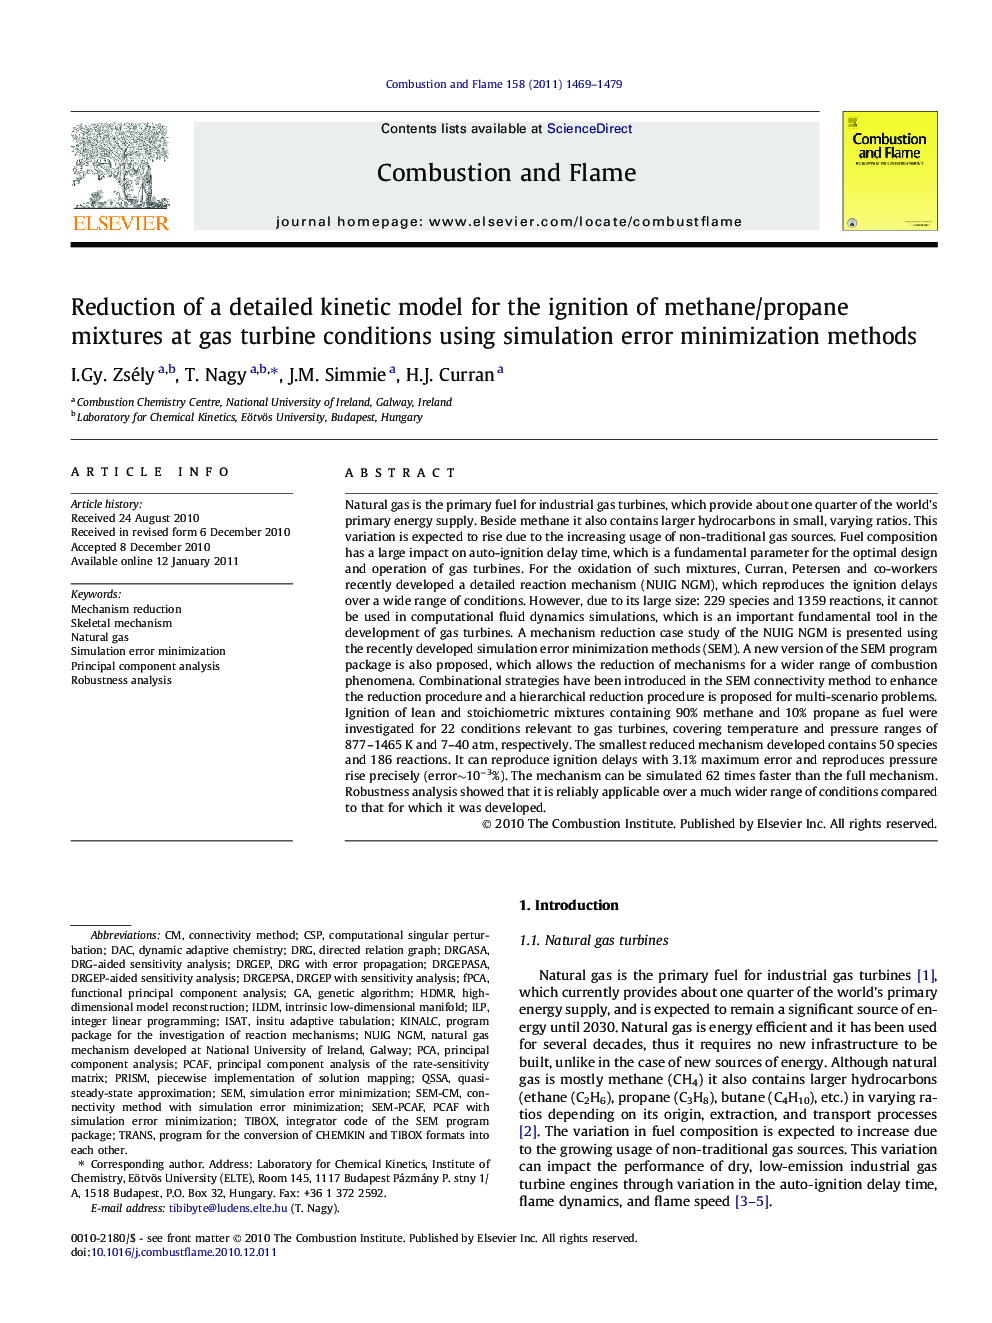 Reduction of a detailed kinetic model for the ignition of methane/propane mixtures at gas turbine conditions using simulation error minimization methods